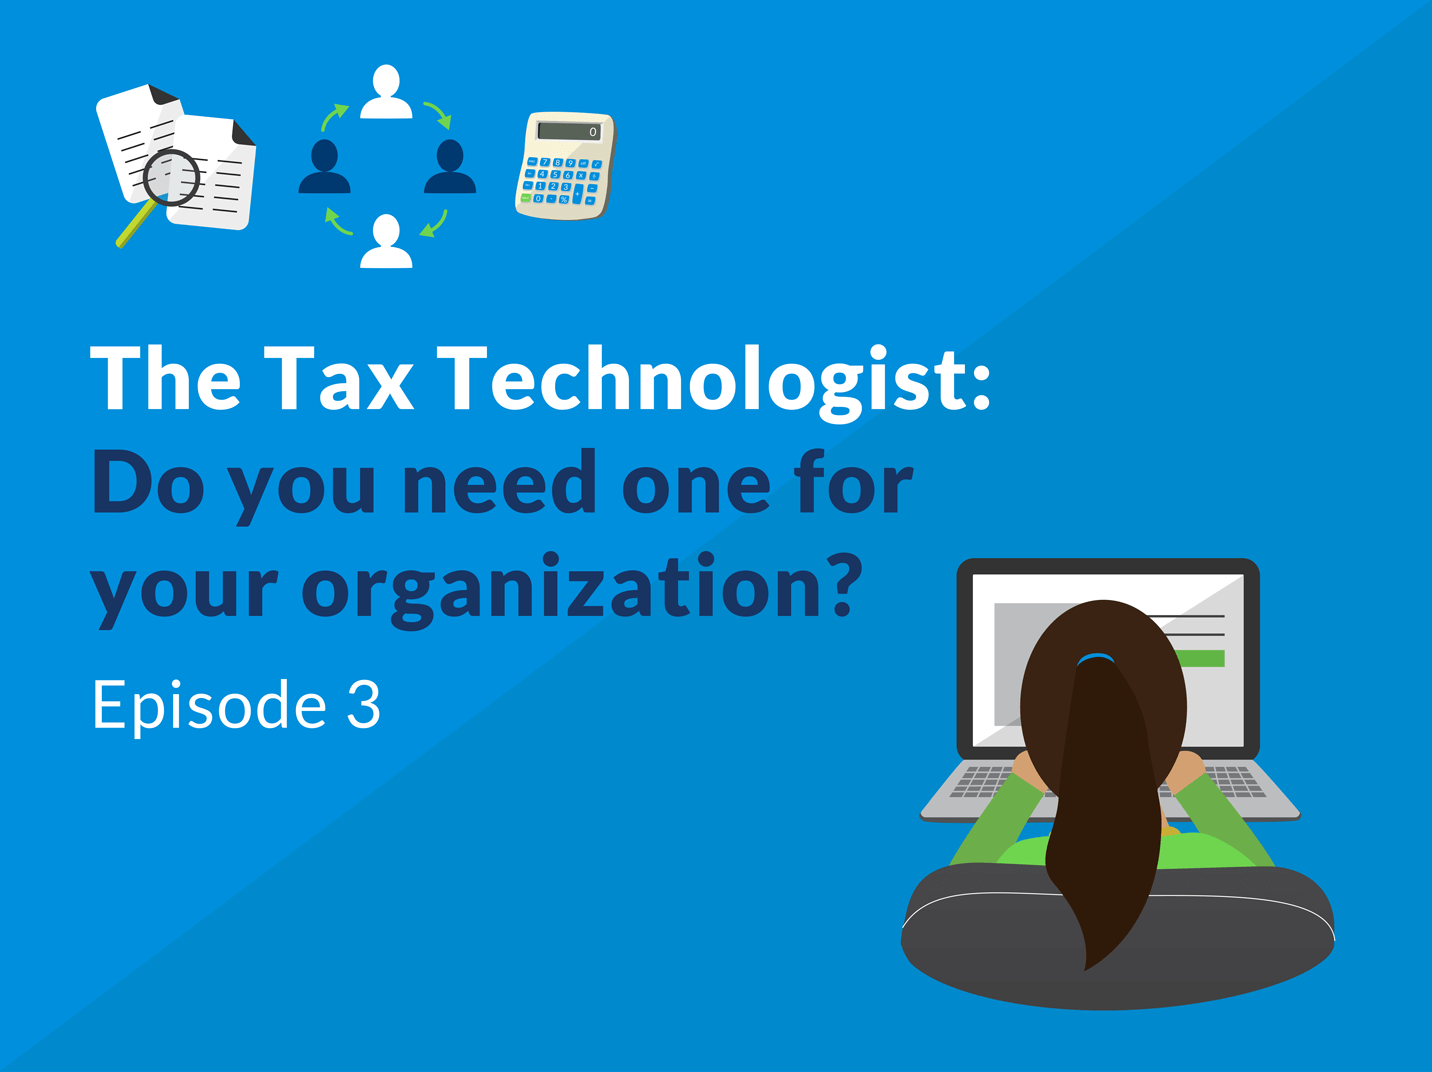 The Tax Technologist: Do you need one for your organization?